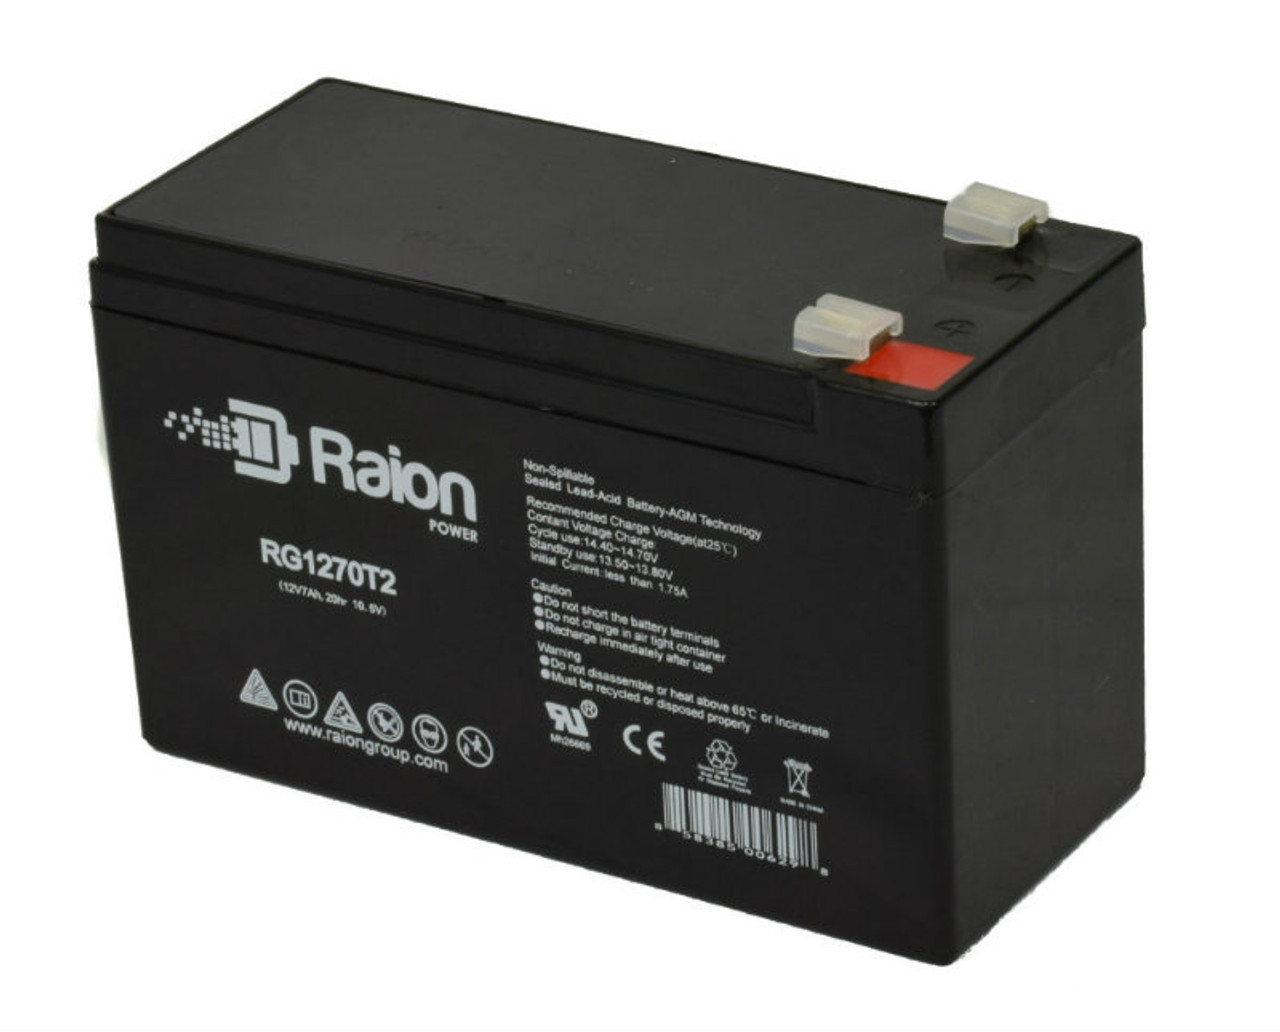 Raion Power RG1270T1 12V 7Ah Non-Spillable Replacement Battery for Baace CB7-12 F1